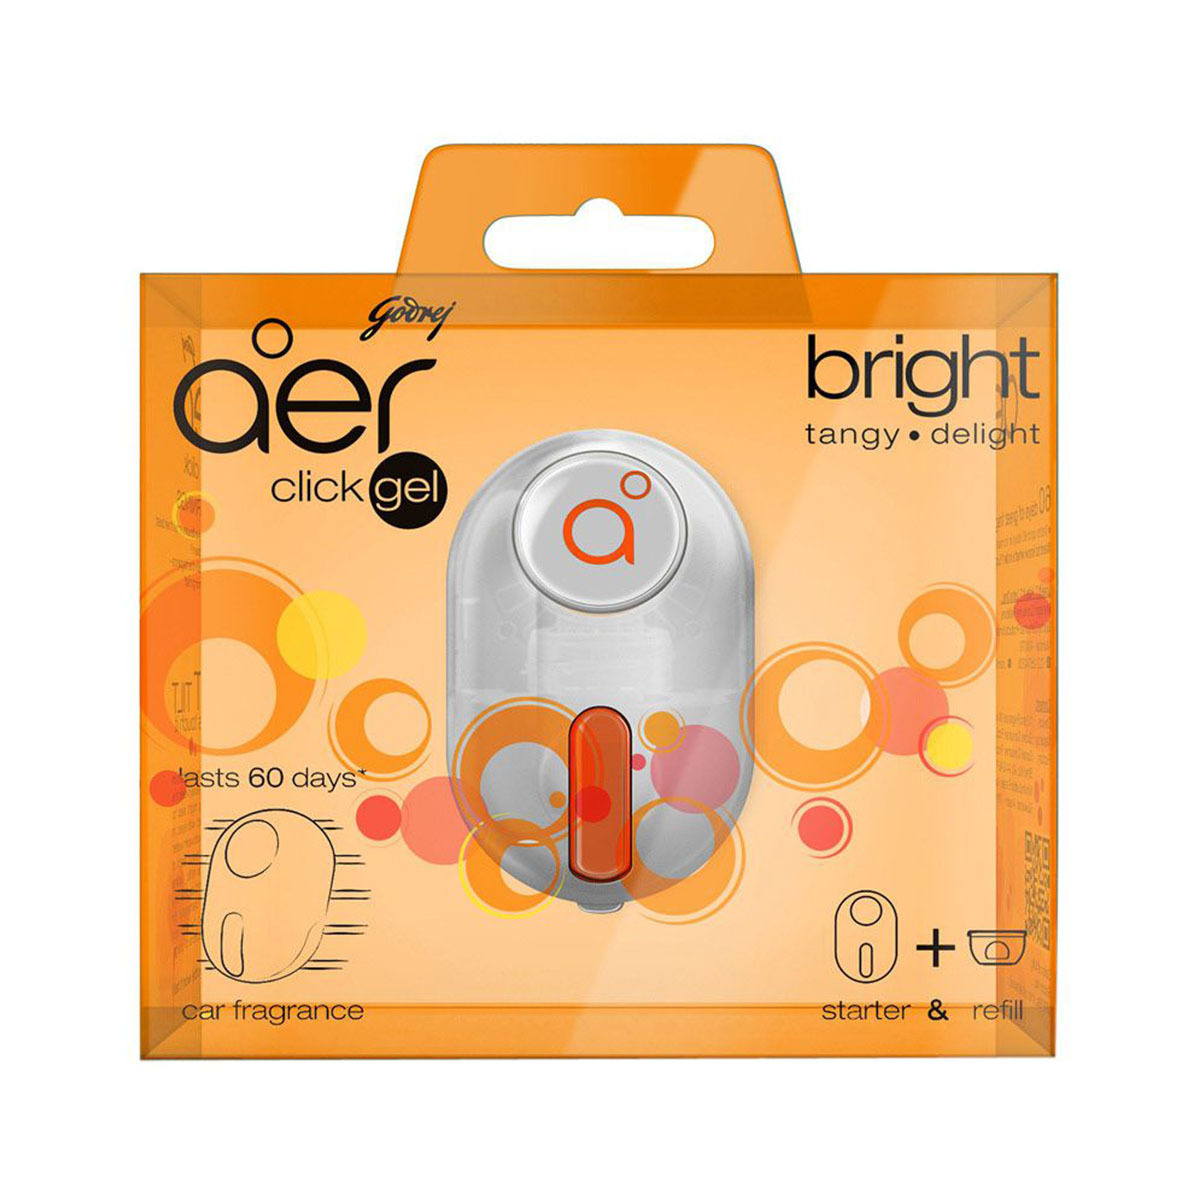 Aer Car Fresheners Tangy Delight 11ml